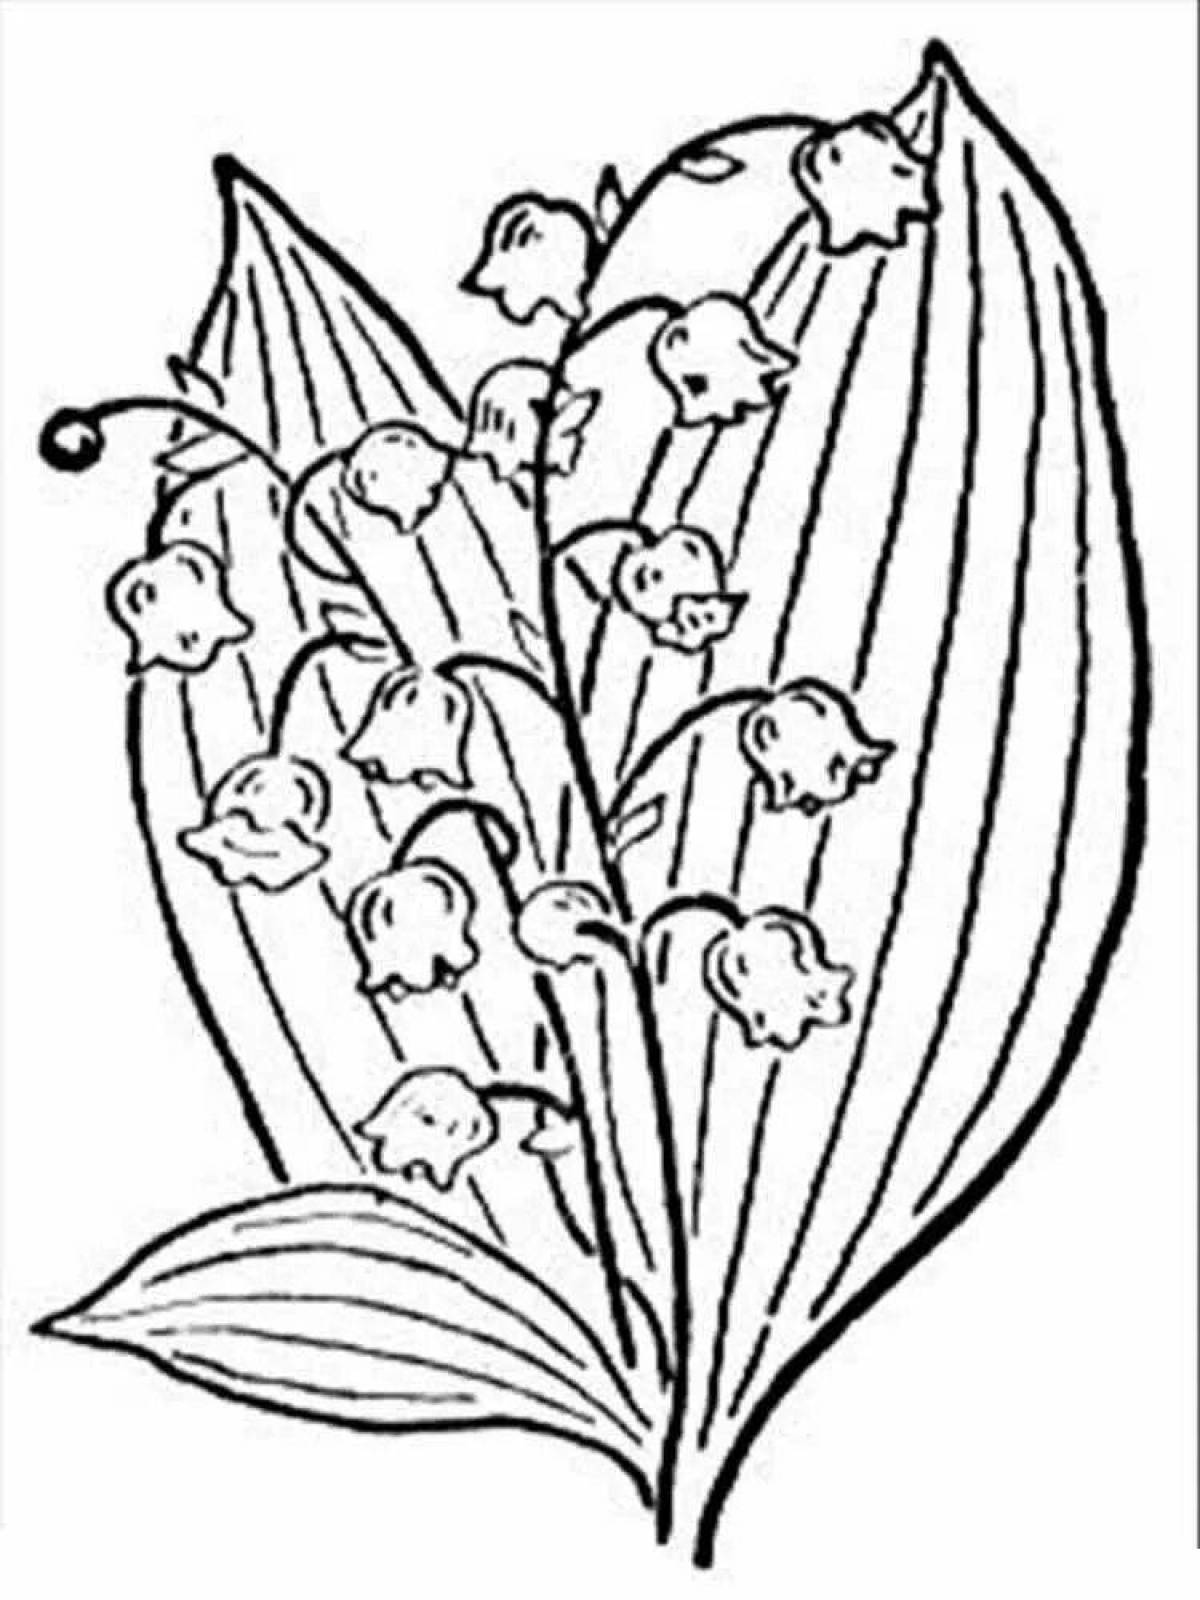 Coloring page charming plants from the red book